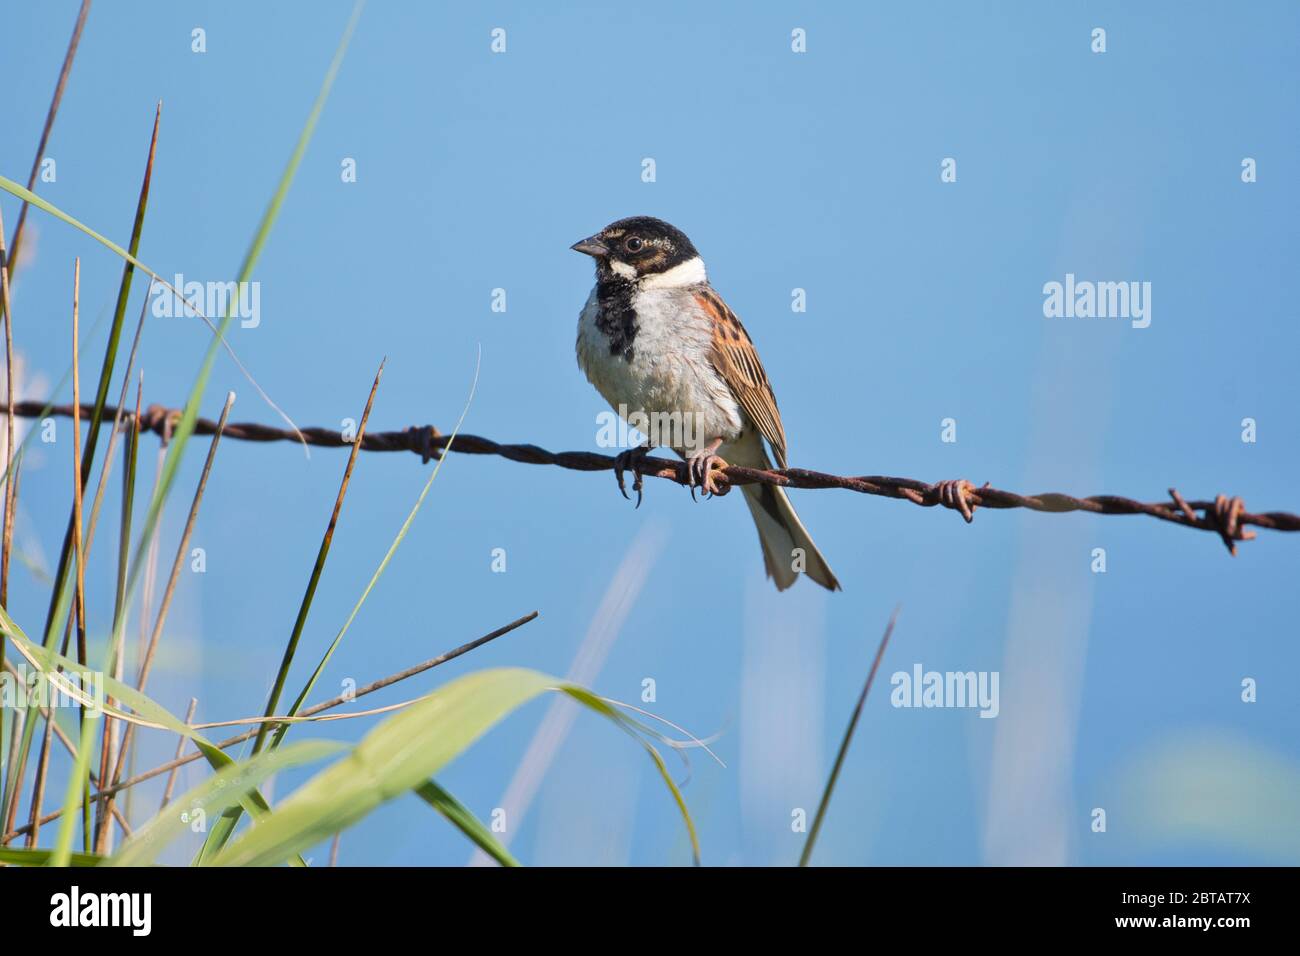 Male reed bunting (Emberiza schoeniclus) perched on barbed wire Stock Photo